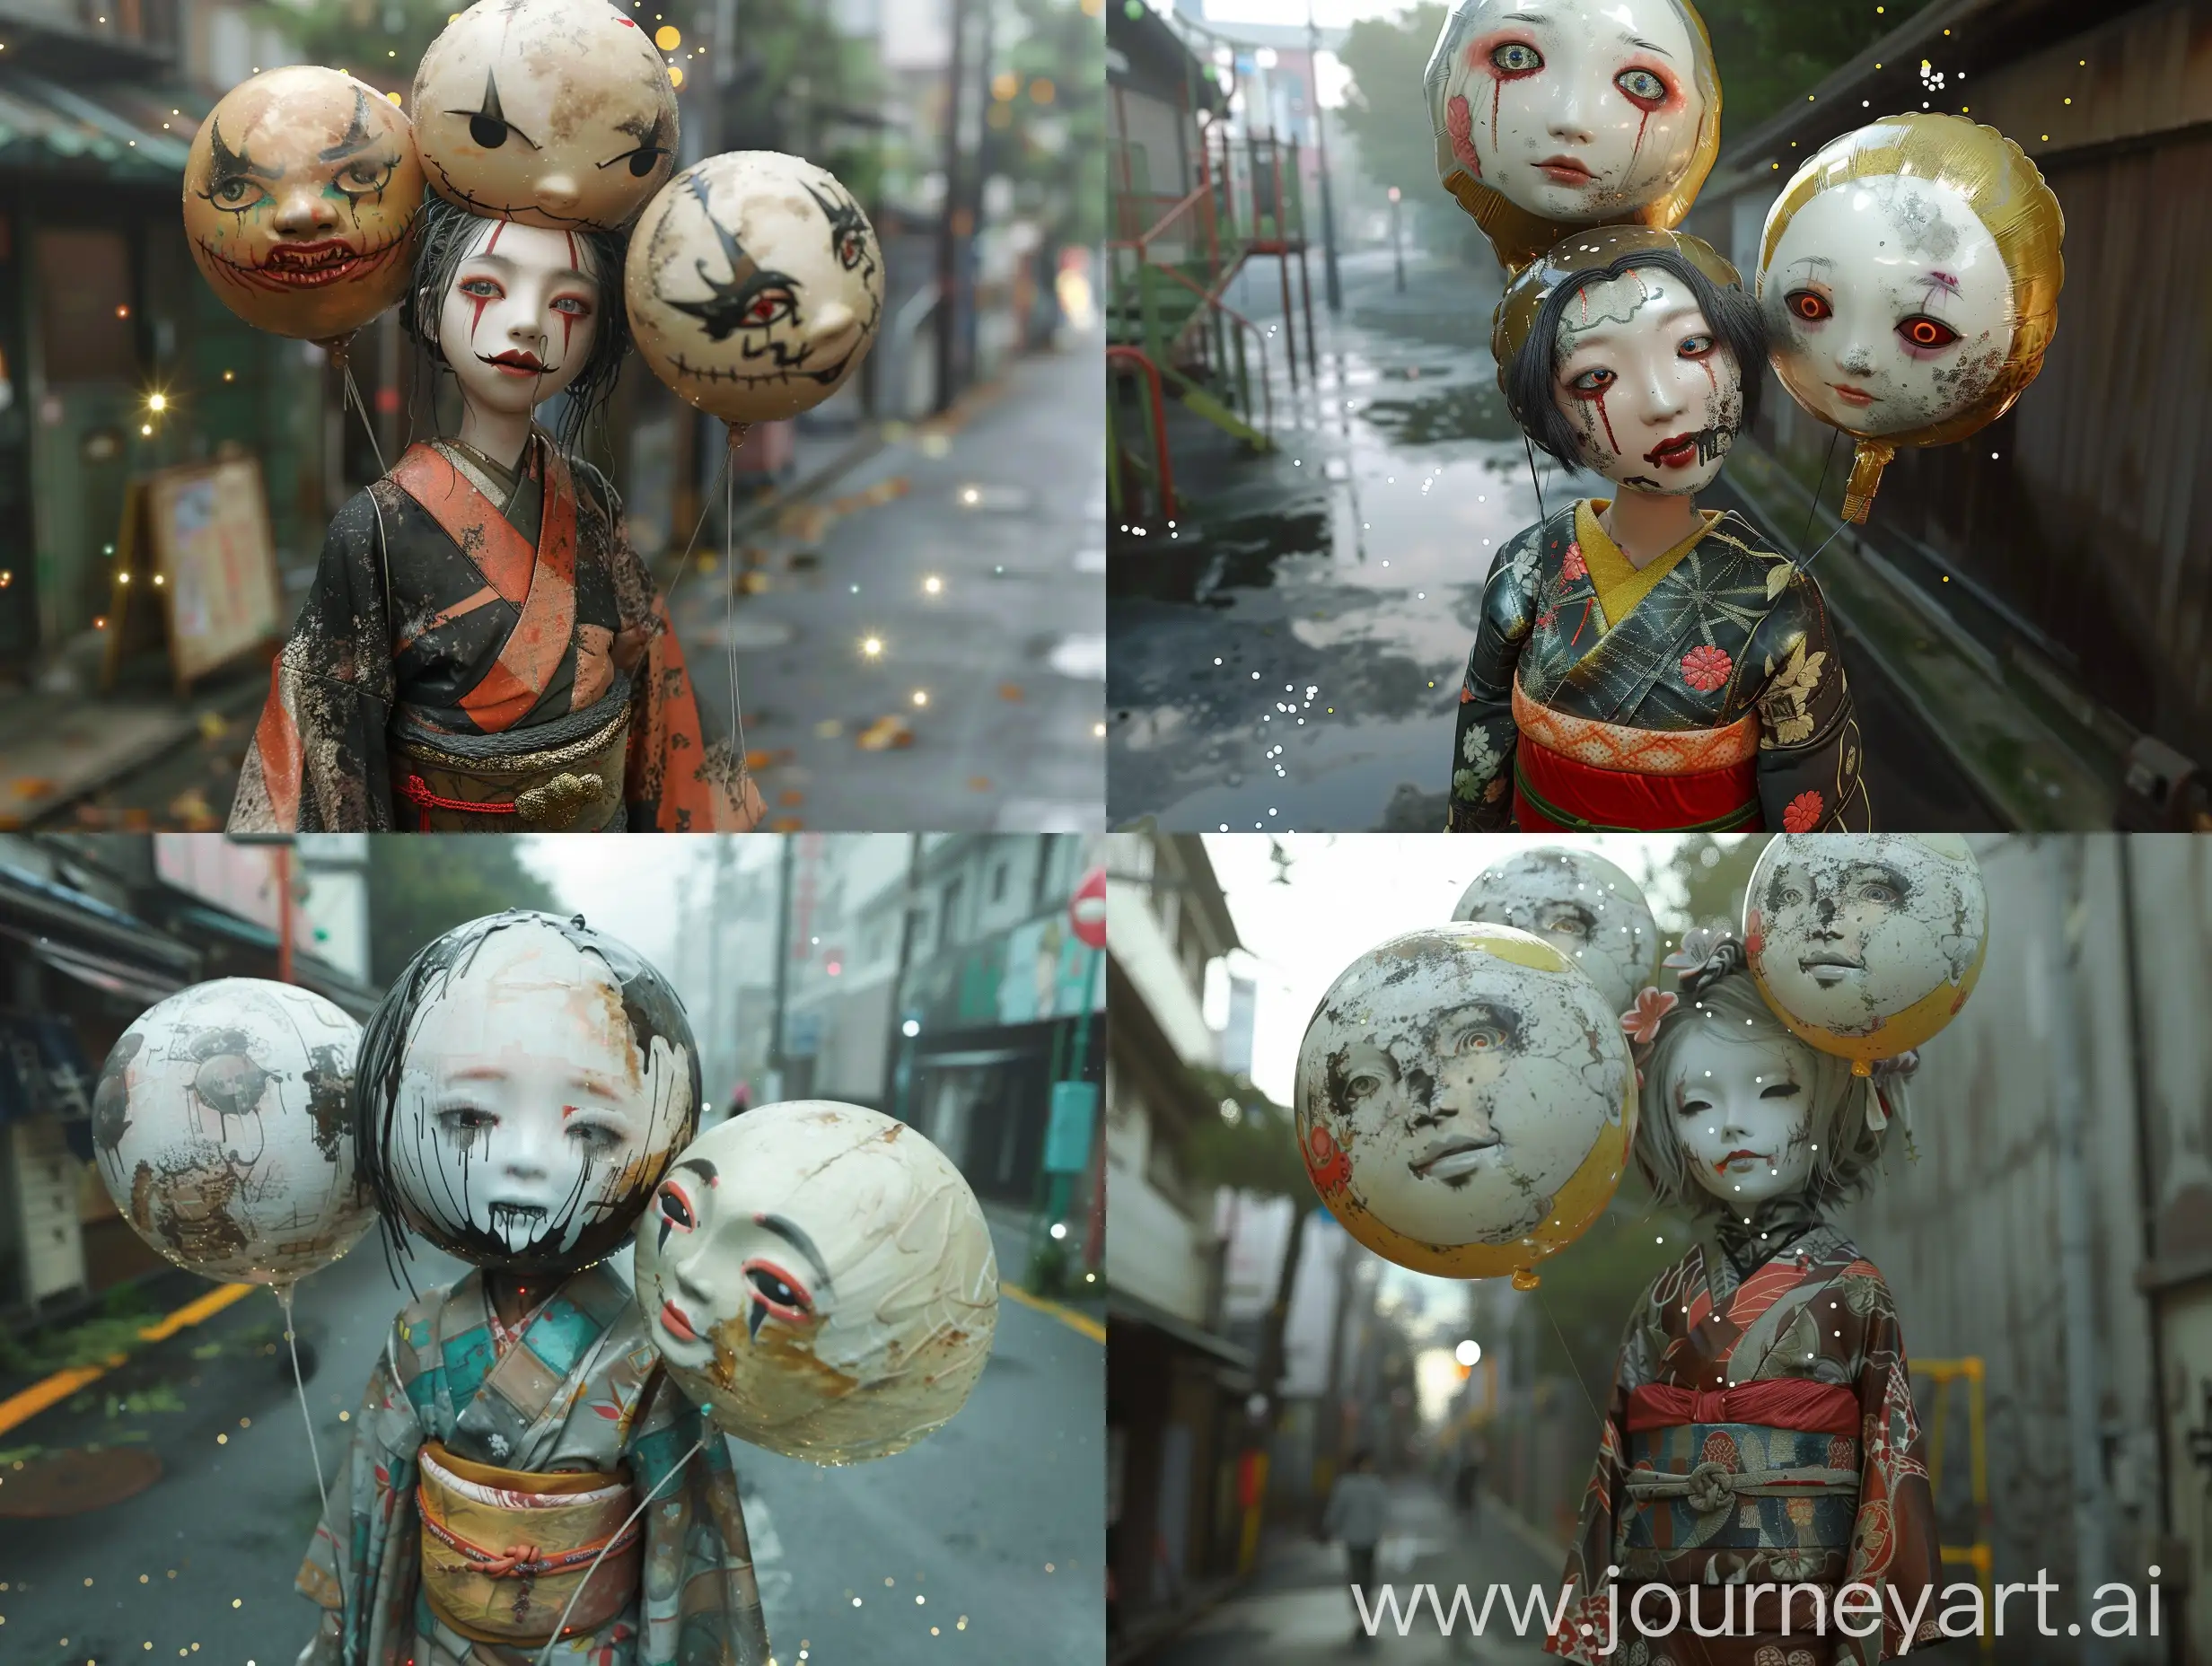 Japanese yokai ((( Her head like a giant balloon, fashionable clothing, floating in air )))scene, bird's eye view, Holding a few balloons with faces on them,  Streets of Shibuya Ward ((( far view, Abandoned playground in Tokyo)), Outdoor, Tilt, Nature, Photography, Light, Octane rendering, cinematic, realism, Using (((imagination))) to craft a photorealistic representation of an unusual fantasy dream, Amazing, shocking, Mysterious, Contrasty, gorgeous, evil, darkness, worn armor, fog, decayed, ivory colors, Memphis, magic sparkles lighting, The UHD camera captures every detail of this moment, highlighting the colors and textures. 